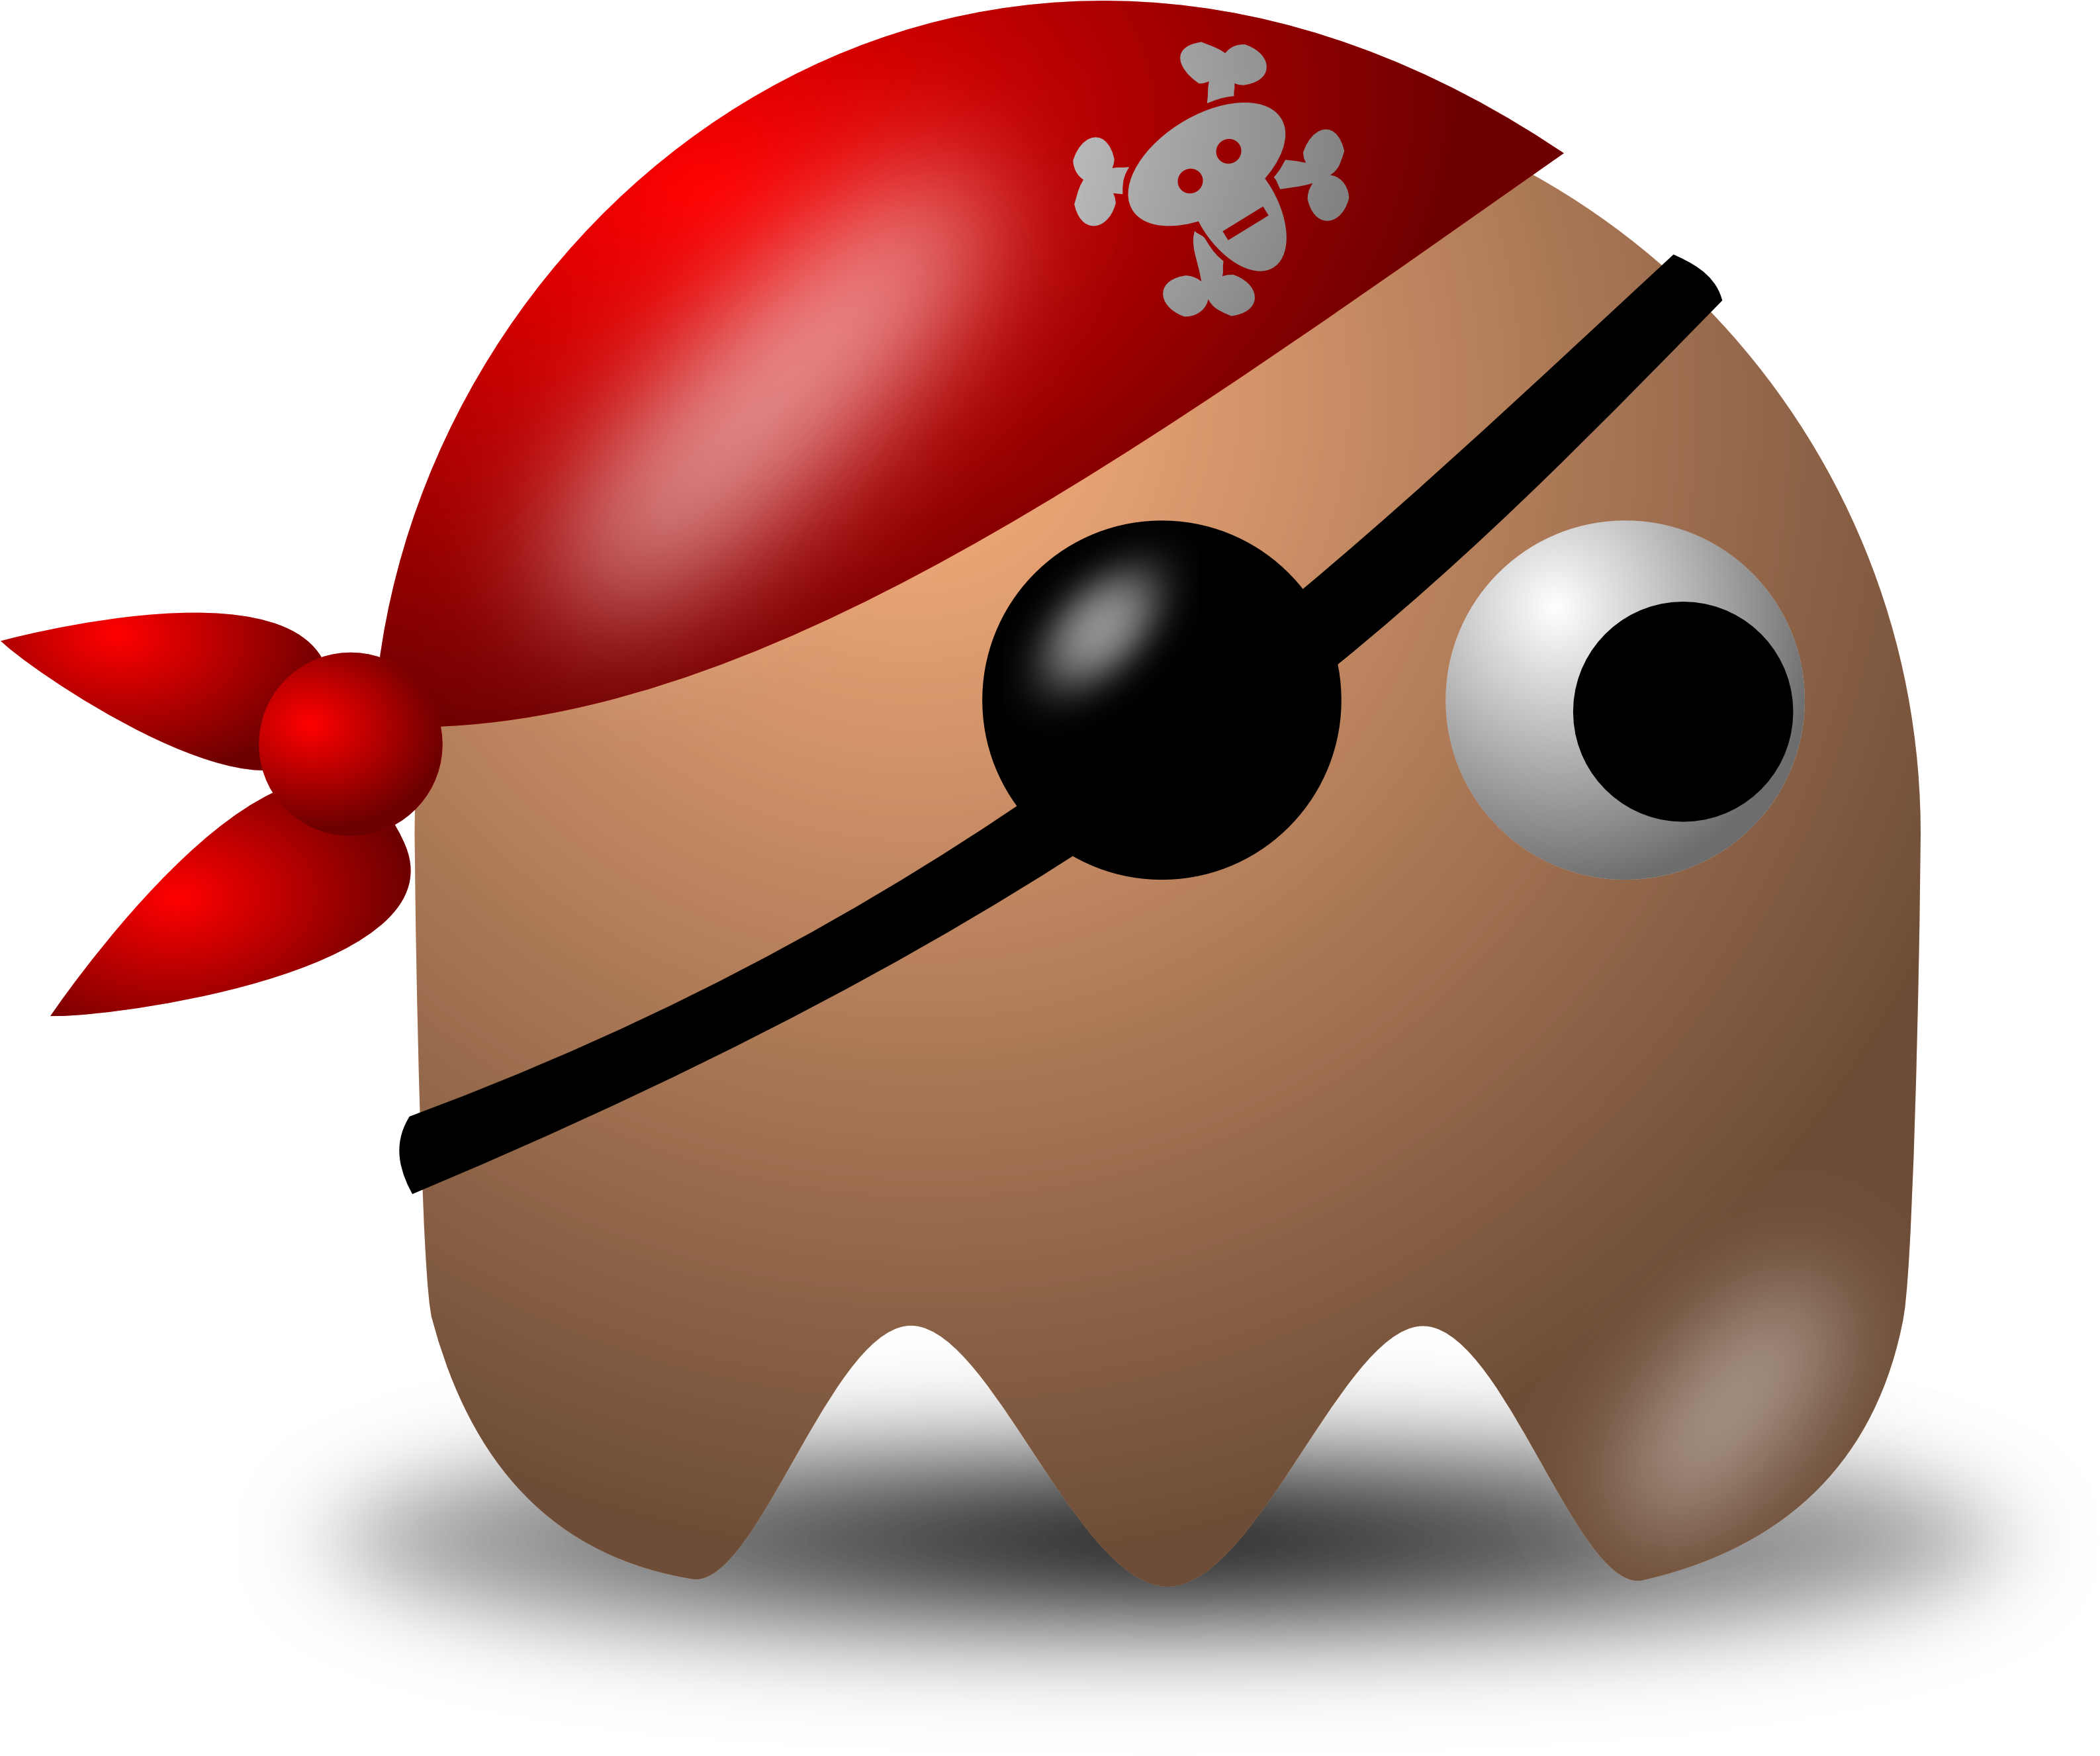 Avatar Pirate Character Wearing Eyepatch And Bandana - Funny Pacman (3200x2679)